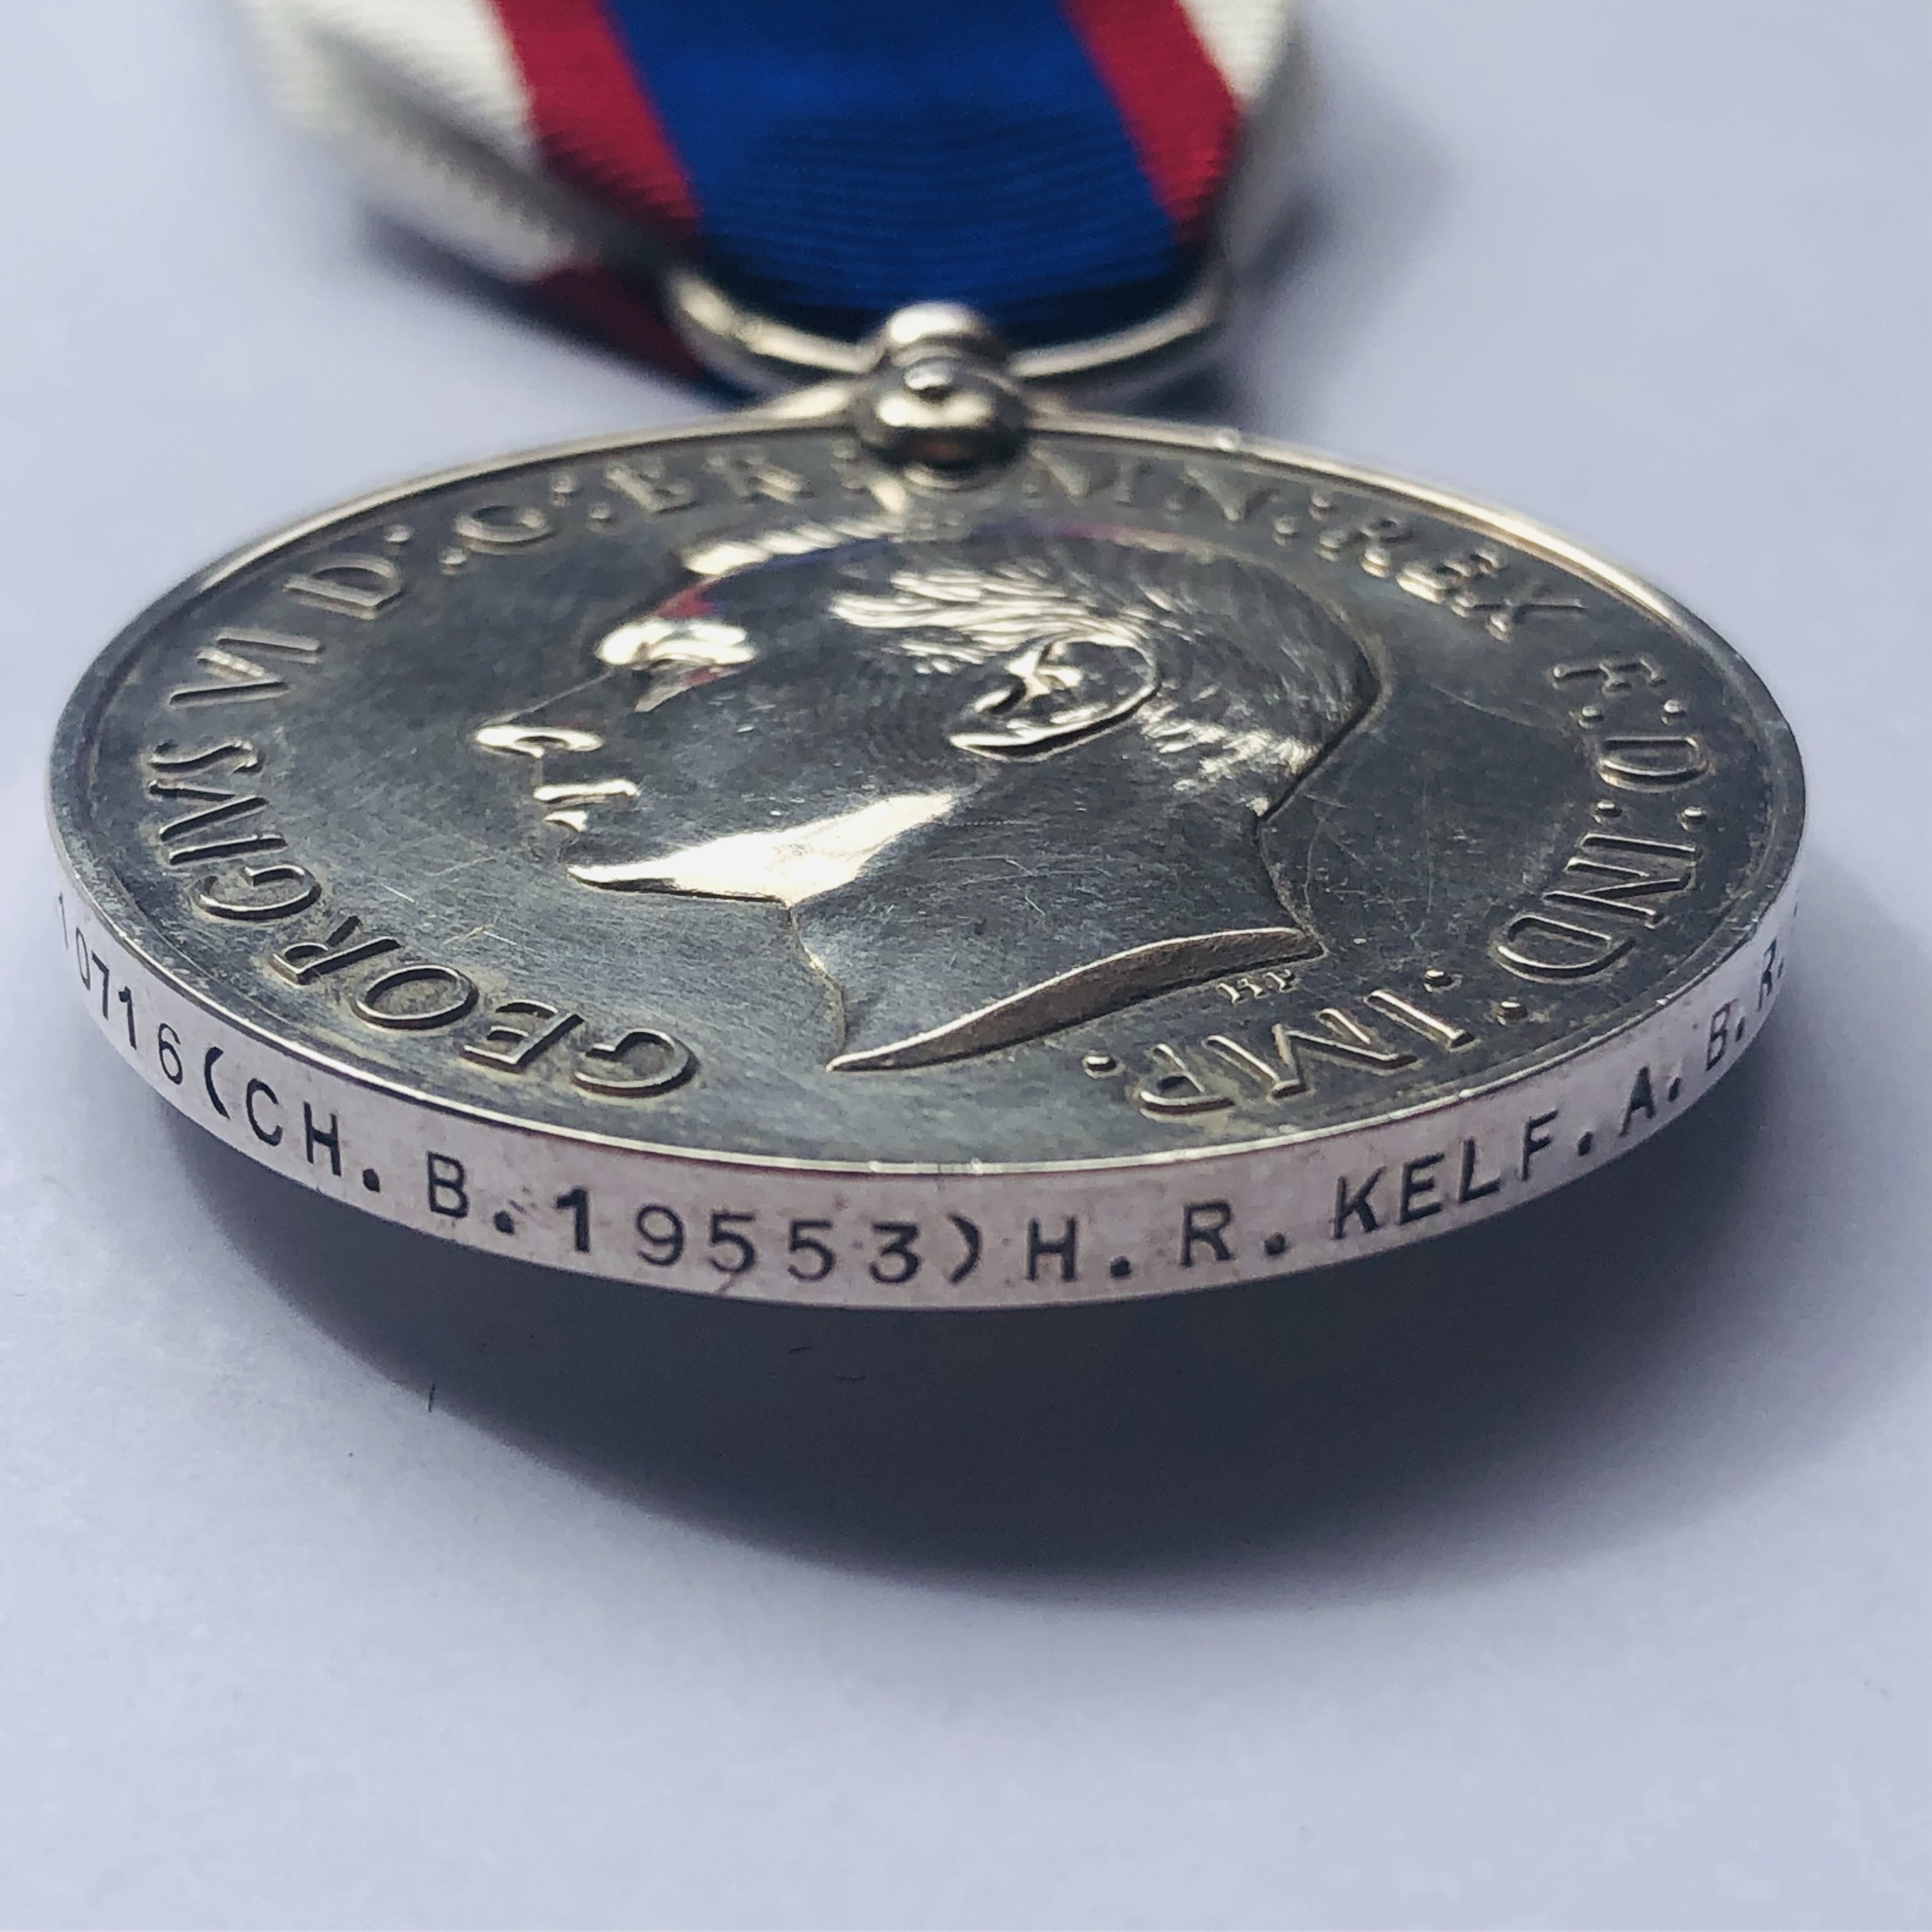 A George VI Royal Fleet Reserve Long Service and Good Conduct Medal to SS 10716 (CH B 19553) H R - Image 3 of 3